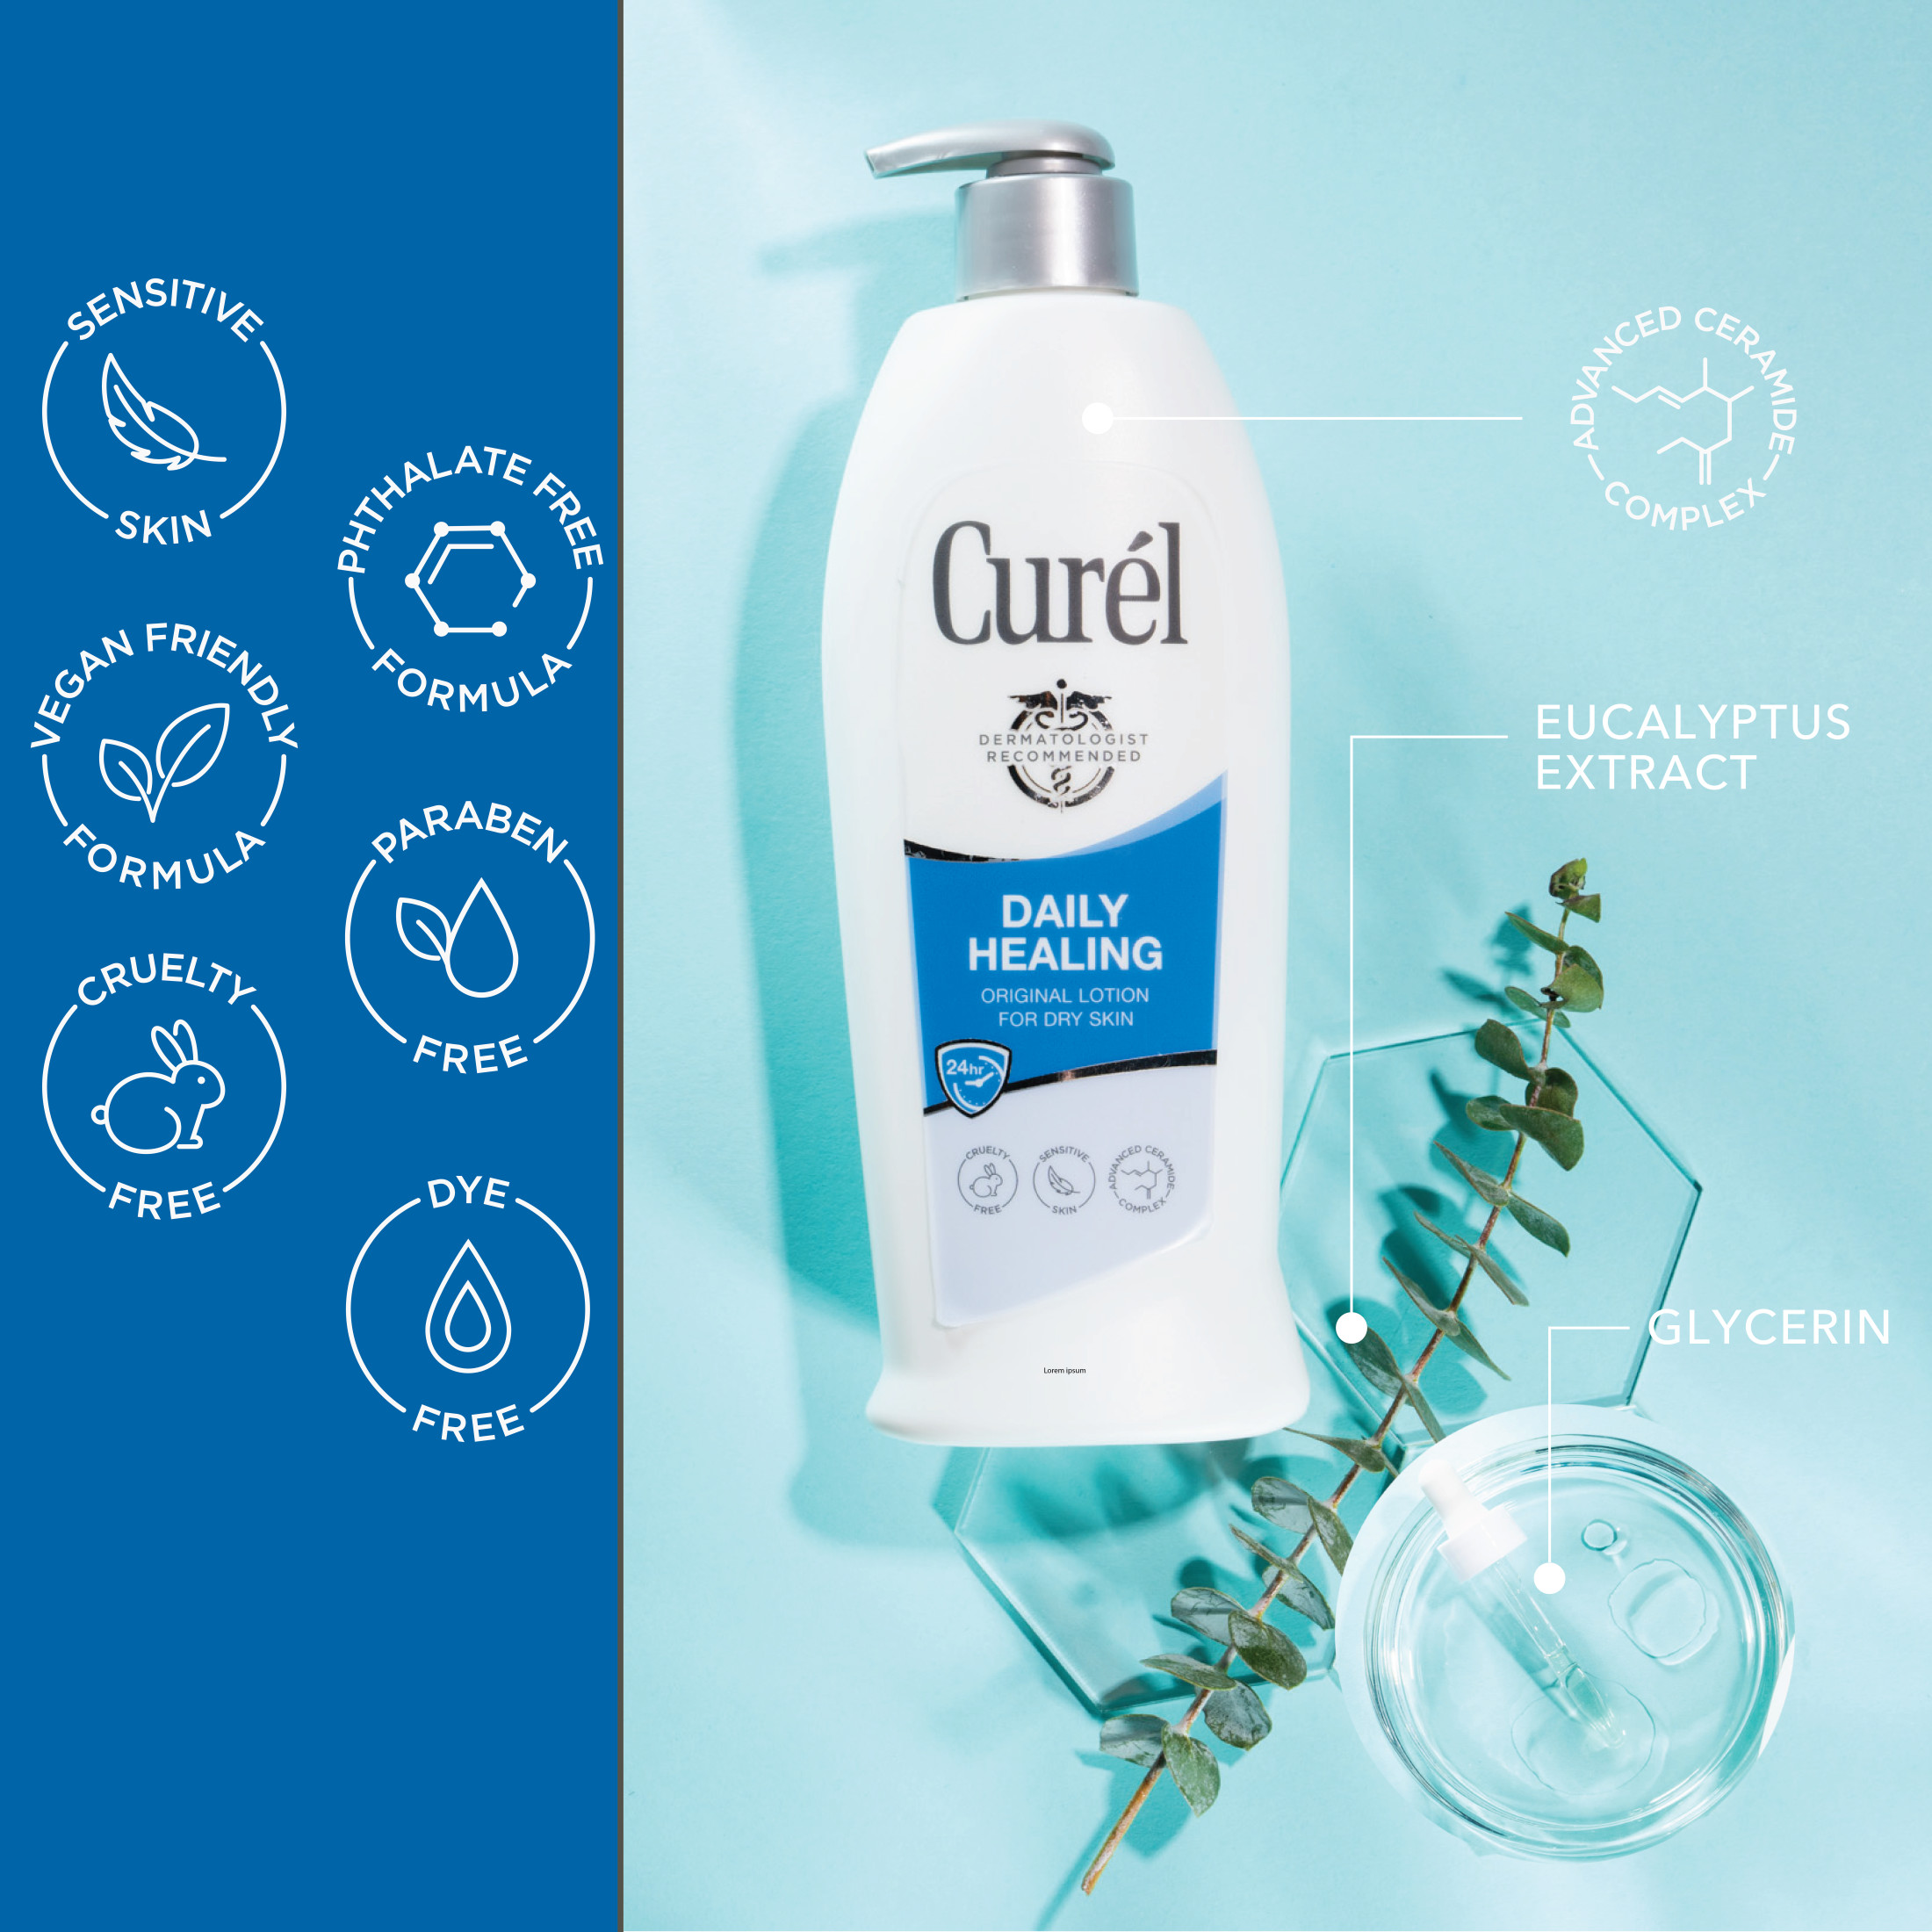 Curel Daily Healing Hand and Body Lotion for Dry Skin, Dermatologist Recommended, with Advanced Ceramides Complex, 20 Ounce Pump Bottle - image 5 of 9